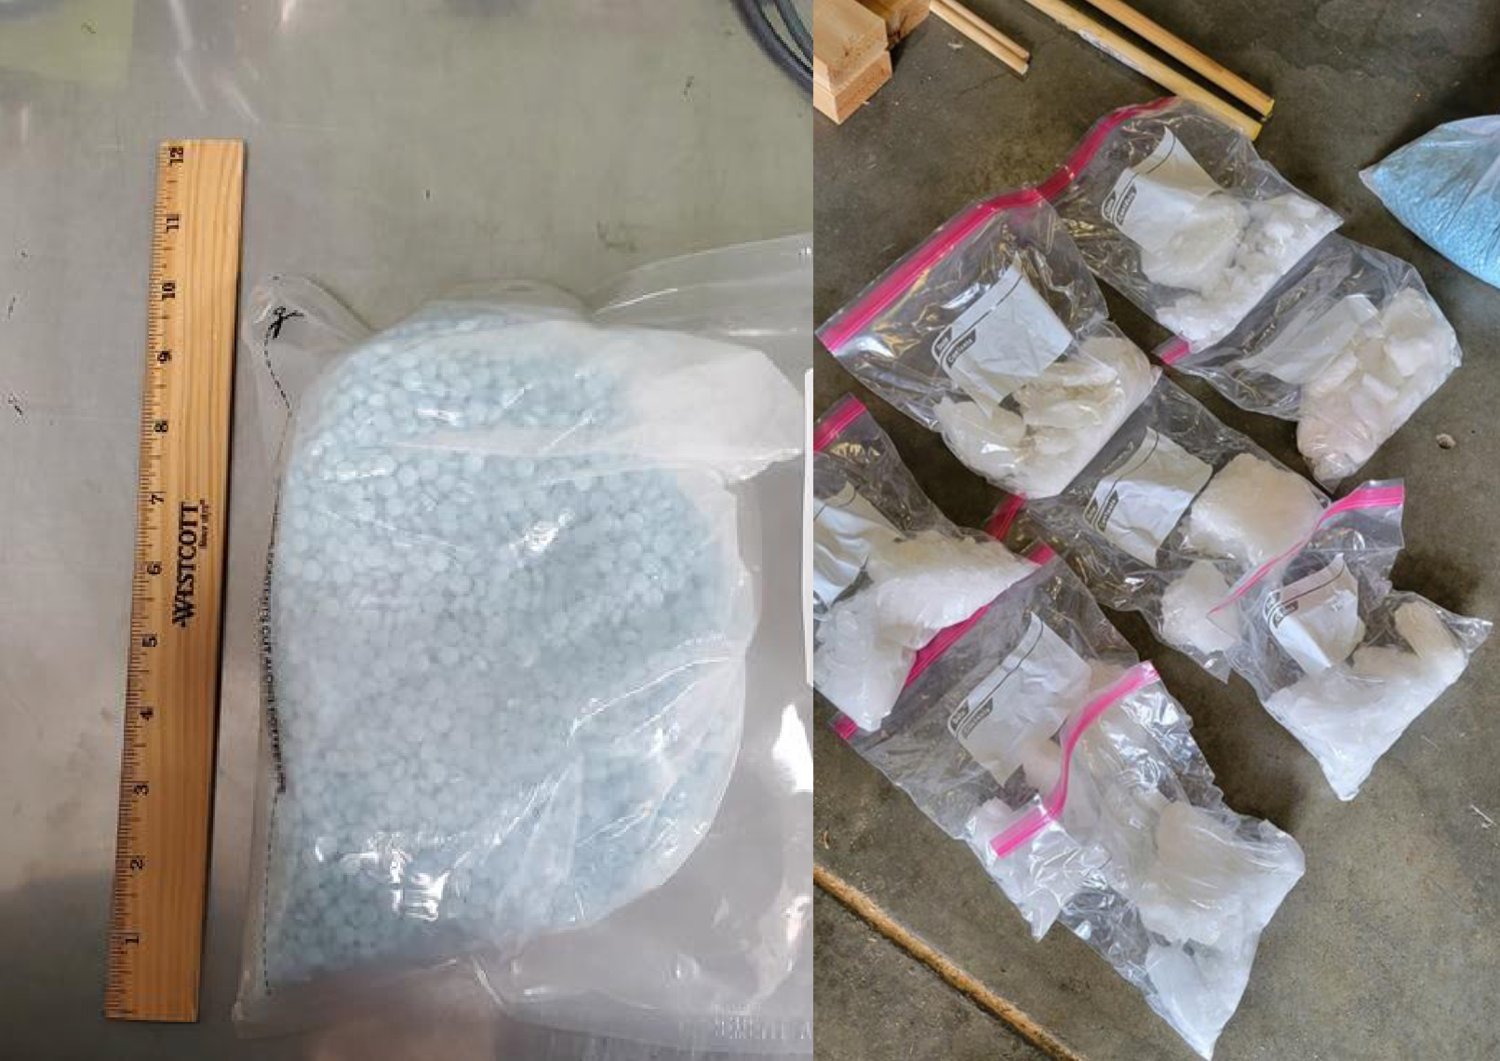 Local law enforcement have arrested two people and seized 8 pounds of suspected methamphetamine and 10,000 pills suspected to contain fentanyl following a traffic stop on northbound Interstate 5 near Centralia on Tuesday. 